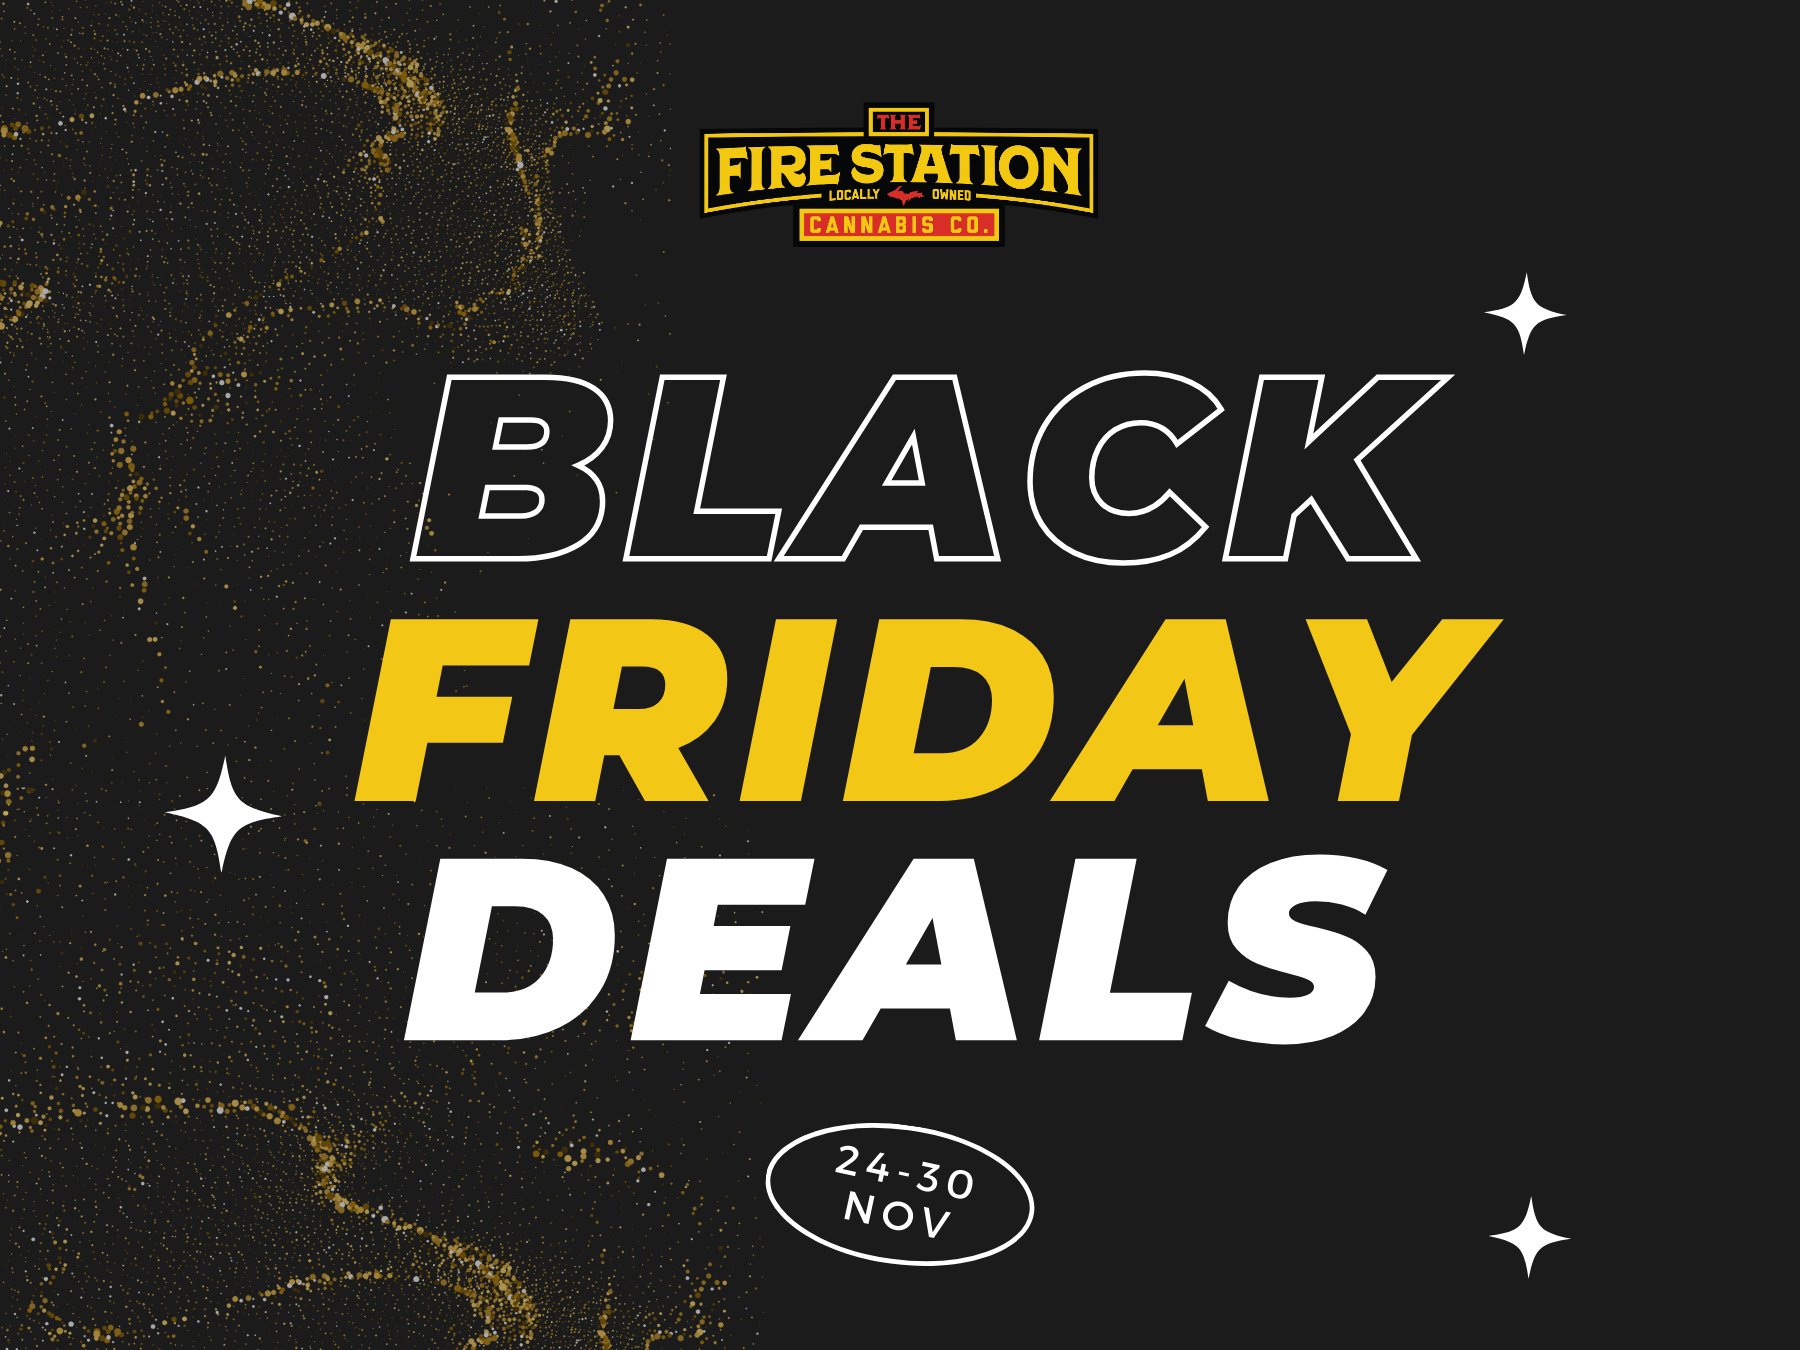 Black Friday Deals with The Fire Station Cannabis Company